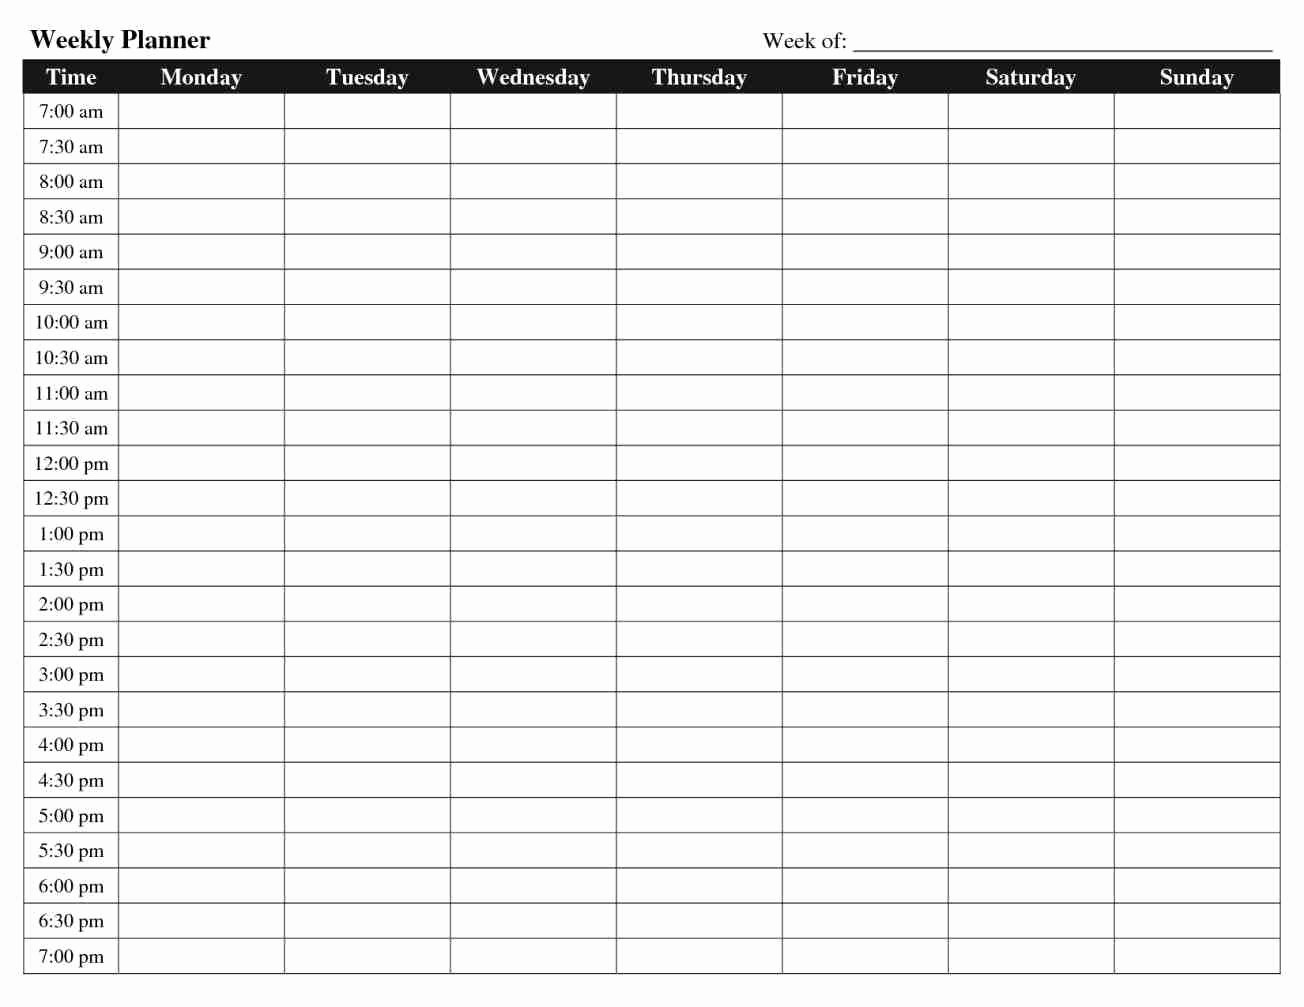 Daily Hourly Schedule Template Lovely Hourly Schedule Template